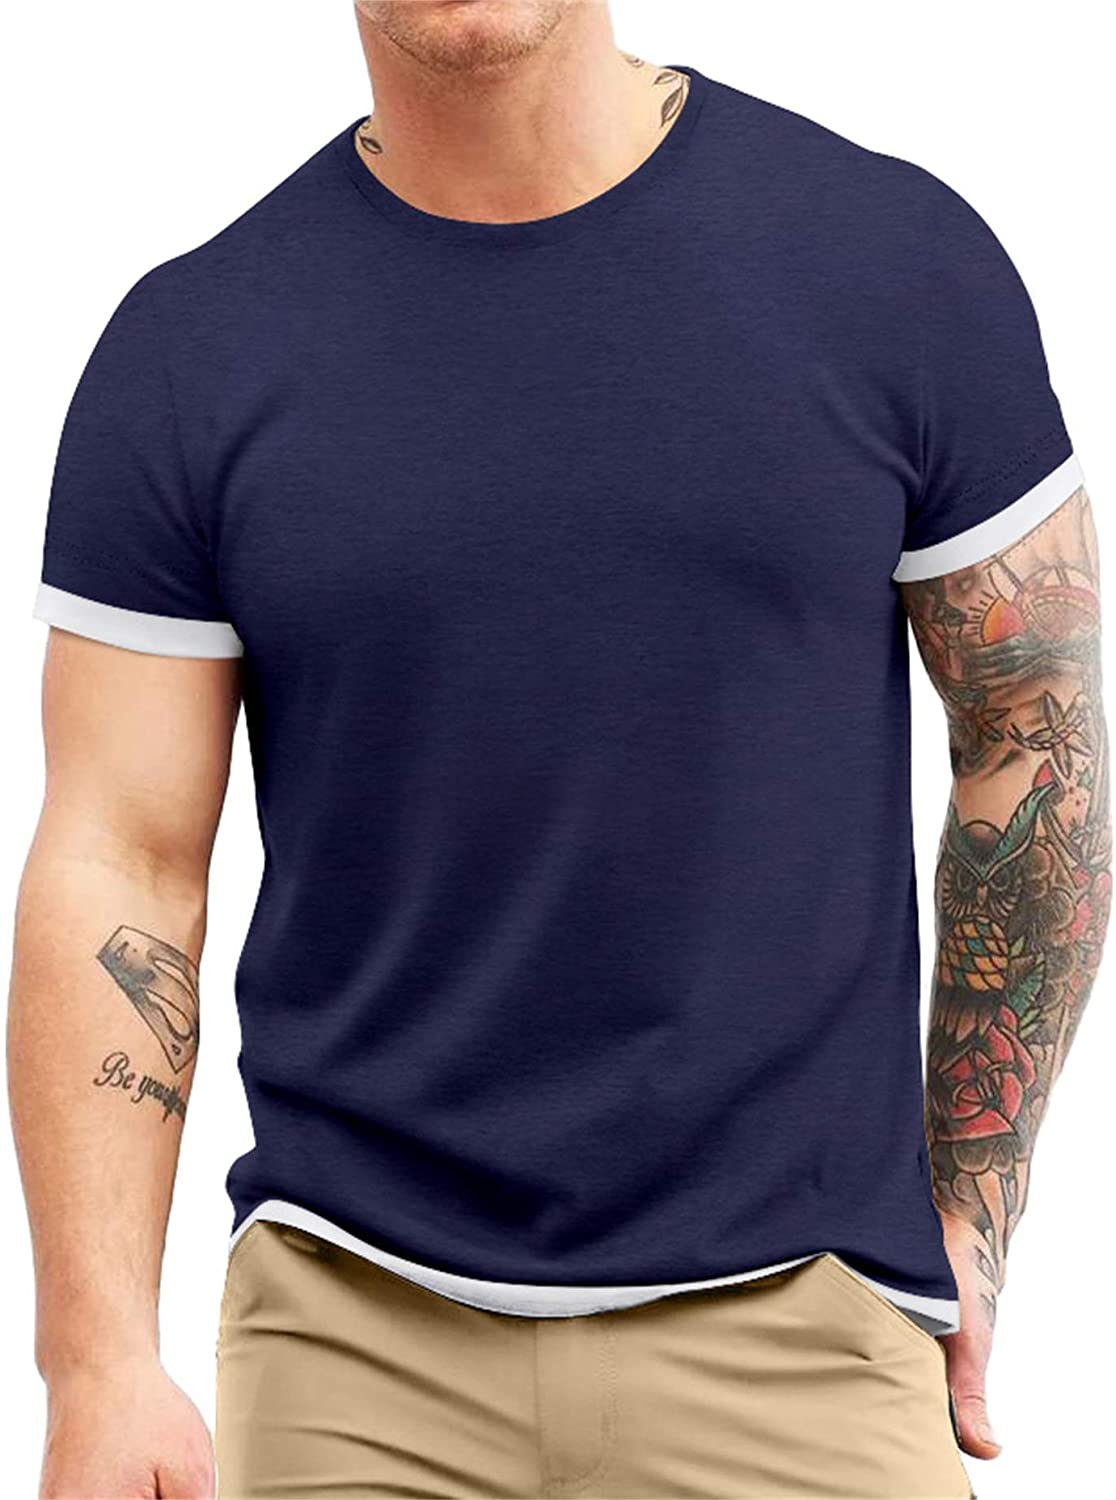 Aiyino Men's S-5XL Short Sleeve Athletic T-Shirt Classic Top Casual Workout Sports Summer Shirts